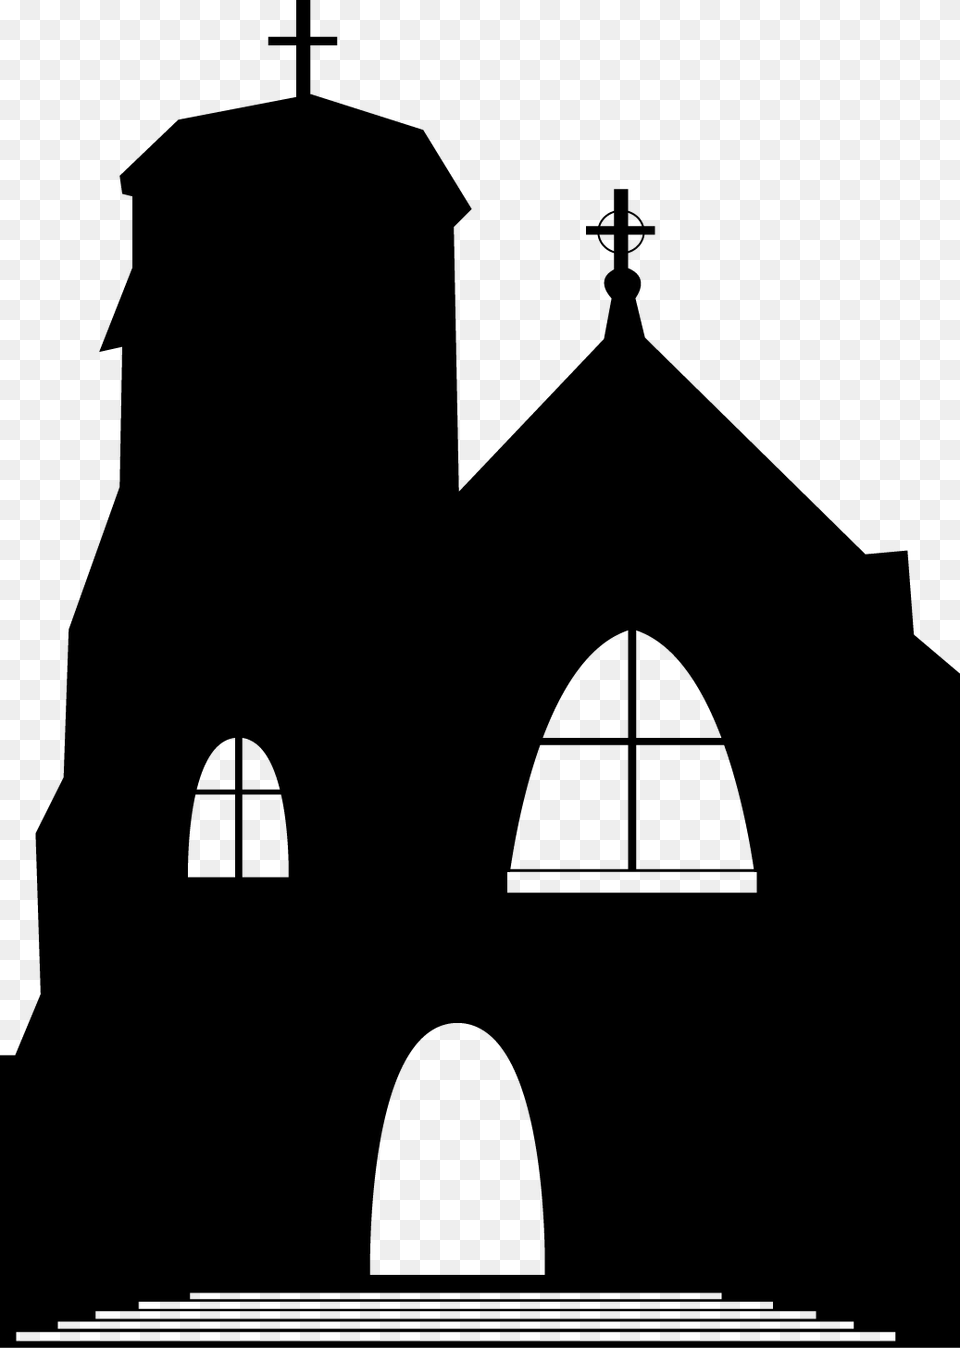 Castle Castle Silhouette Church Silhouette, Architecture, Building, Cathedral, Cross Png